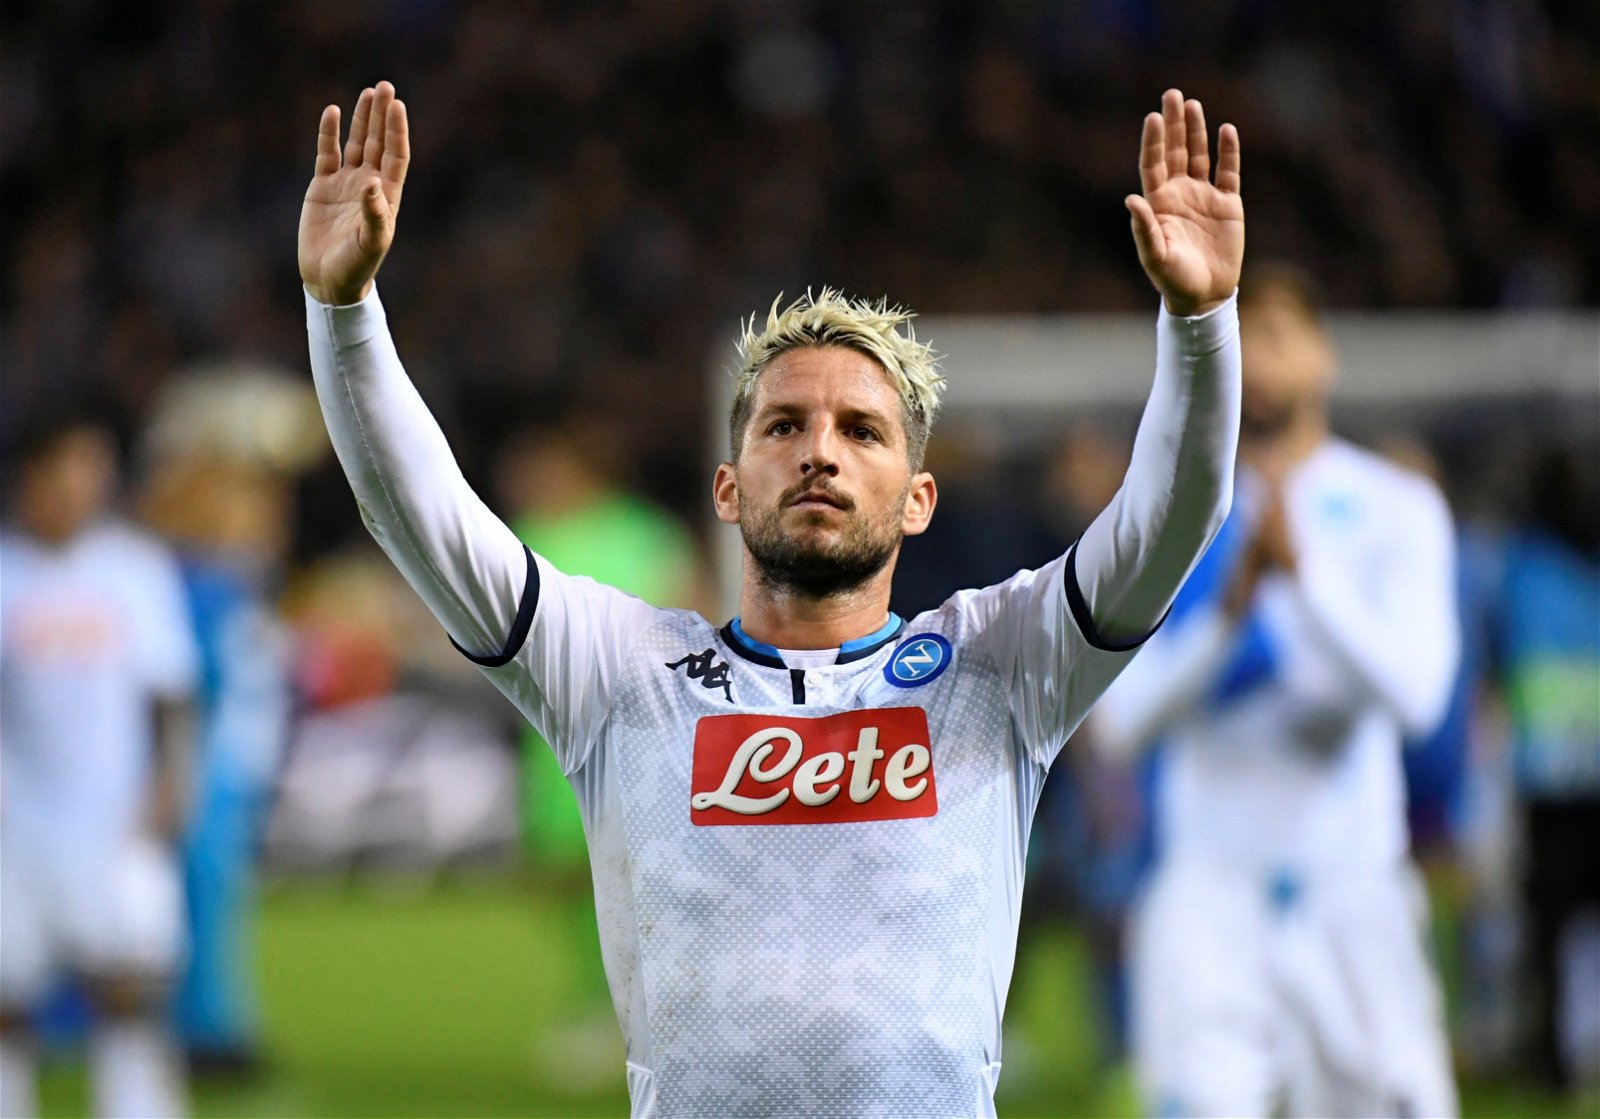 Napoli exodus leader Dries Mertens to join rival Inter Milan in January or June